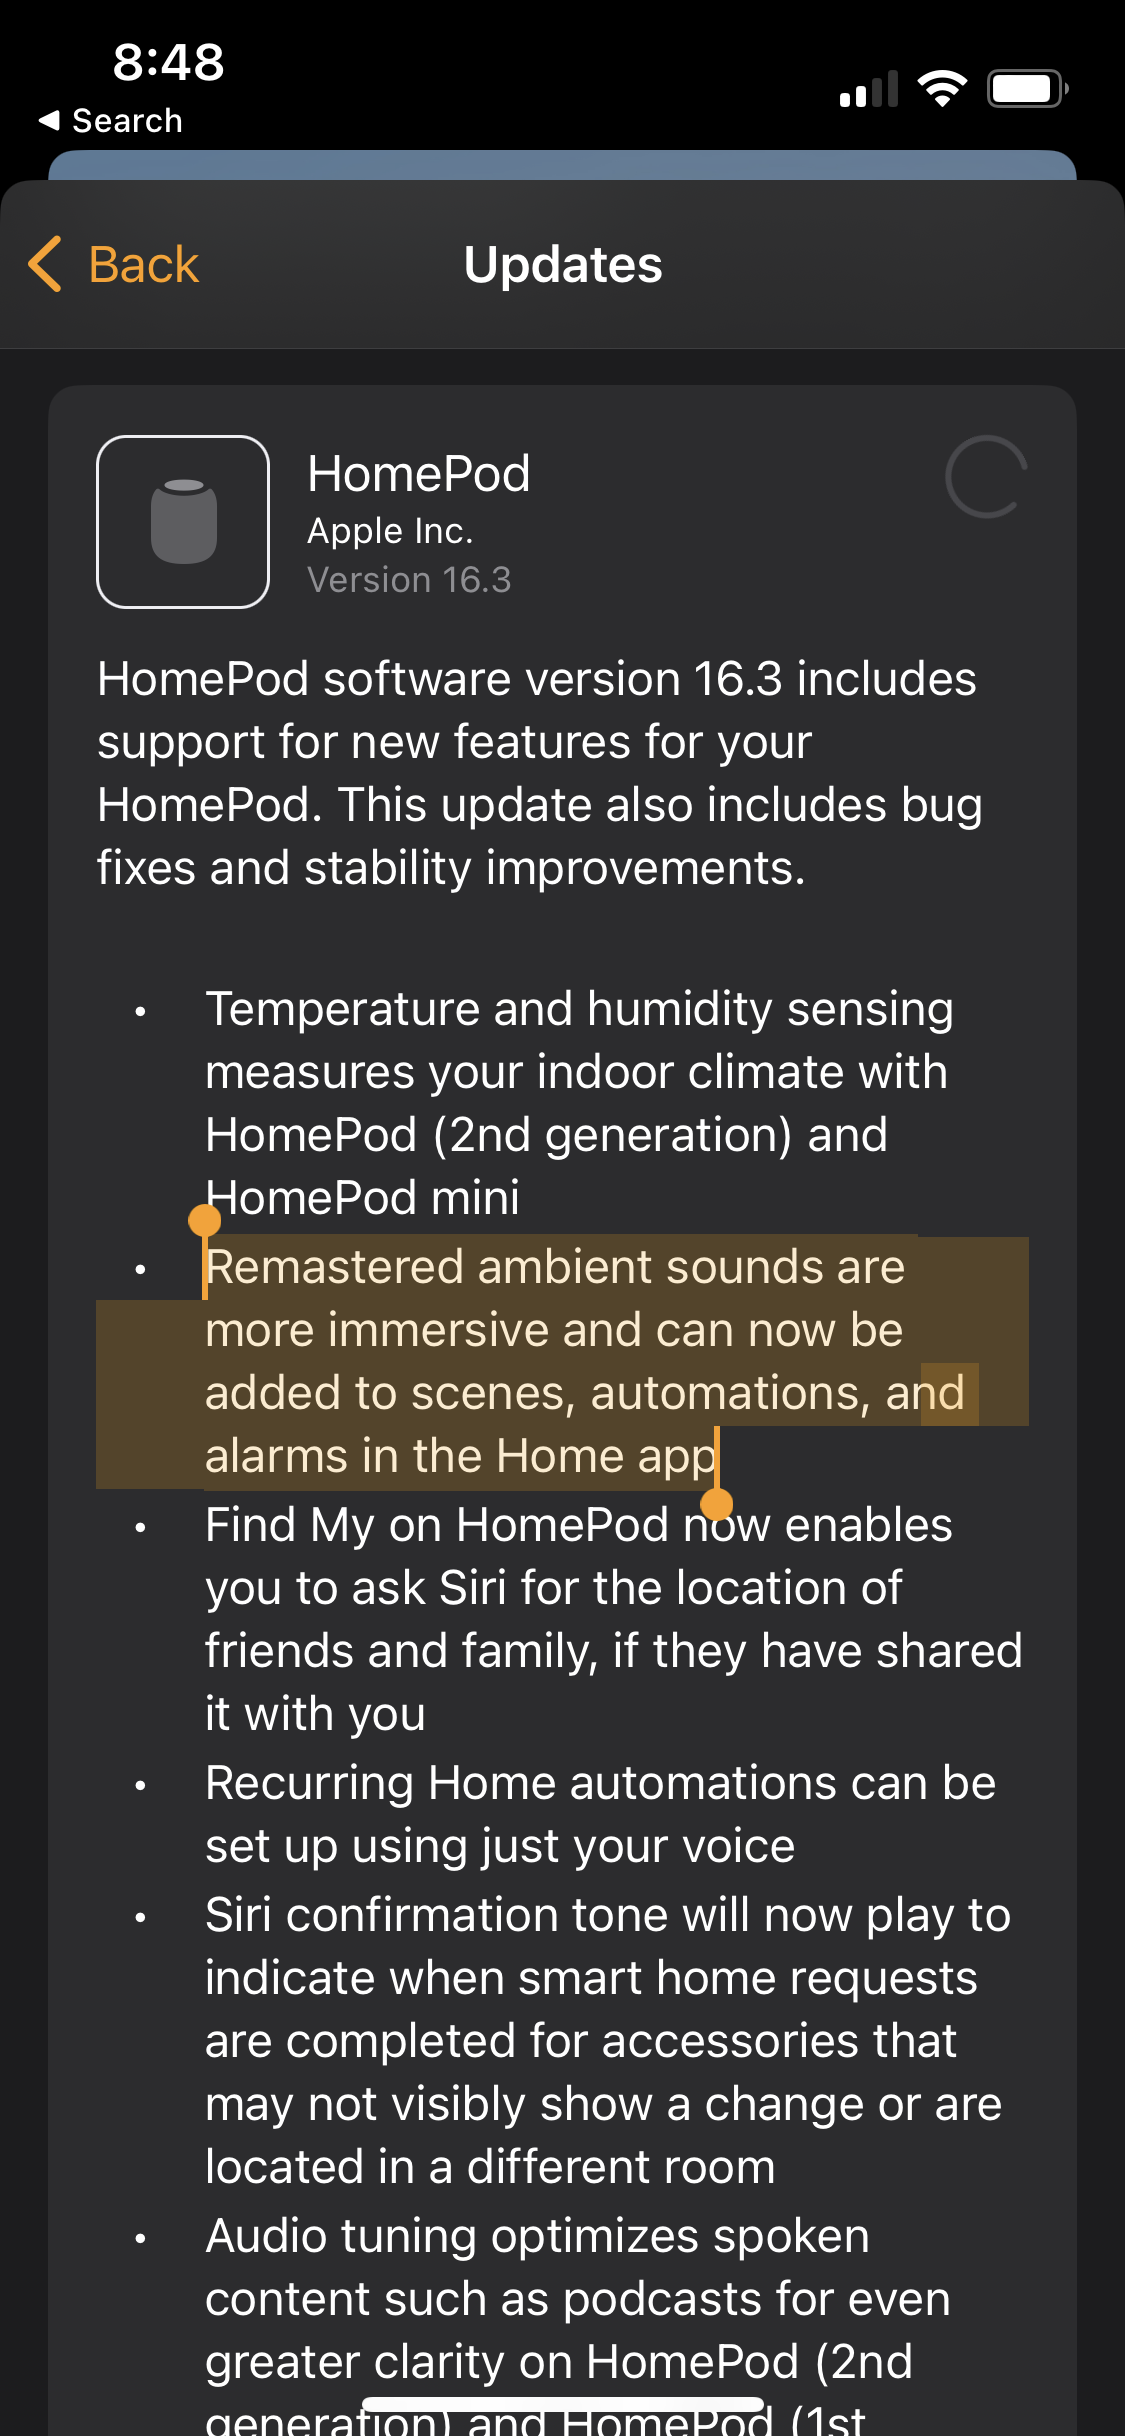 HomePod software update notes highlighting that “Remastered ambient sounds are more immersive and can now be added to scenes, automations, and alarms in the Home app”